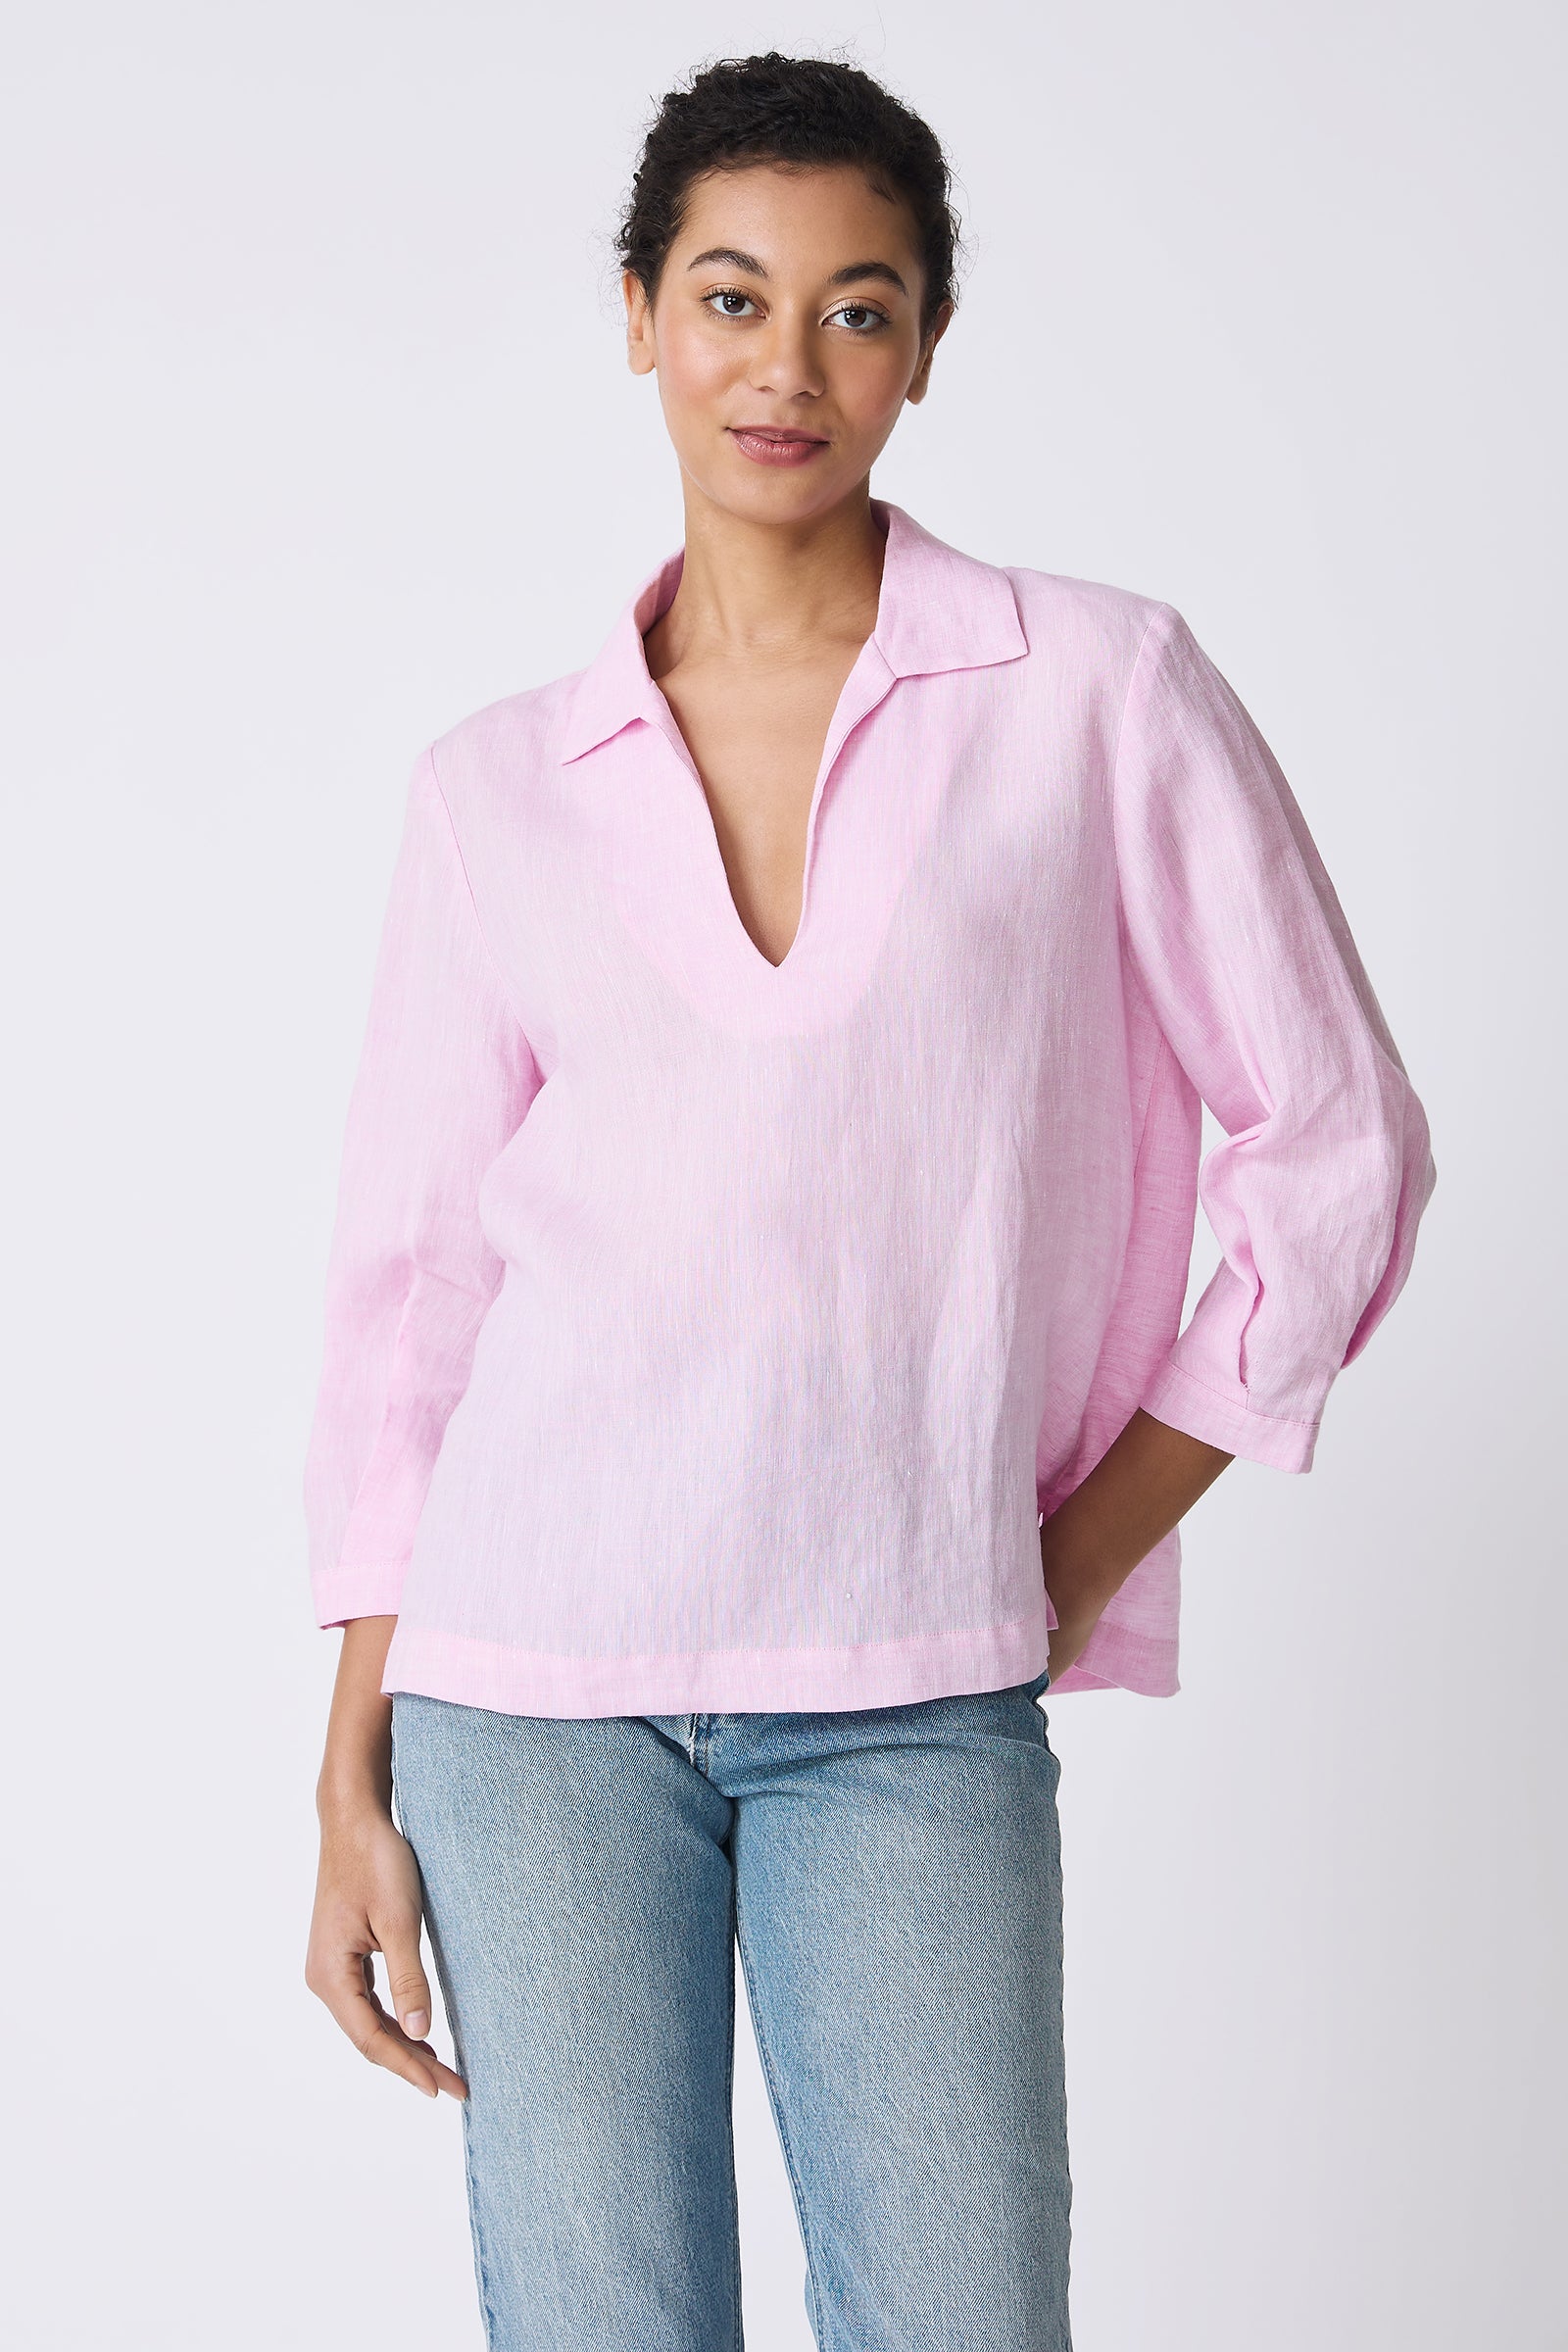 Kal Rieman Lea Collared V-Neck Top in Pink on model front view